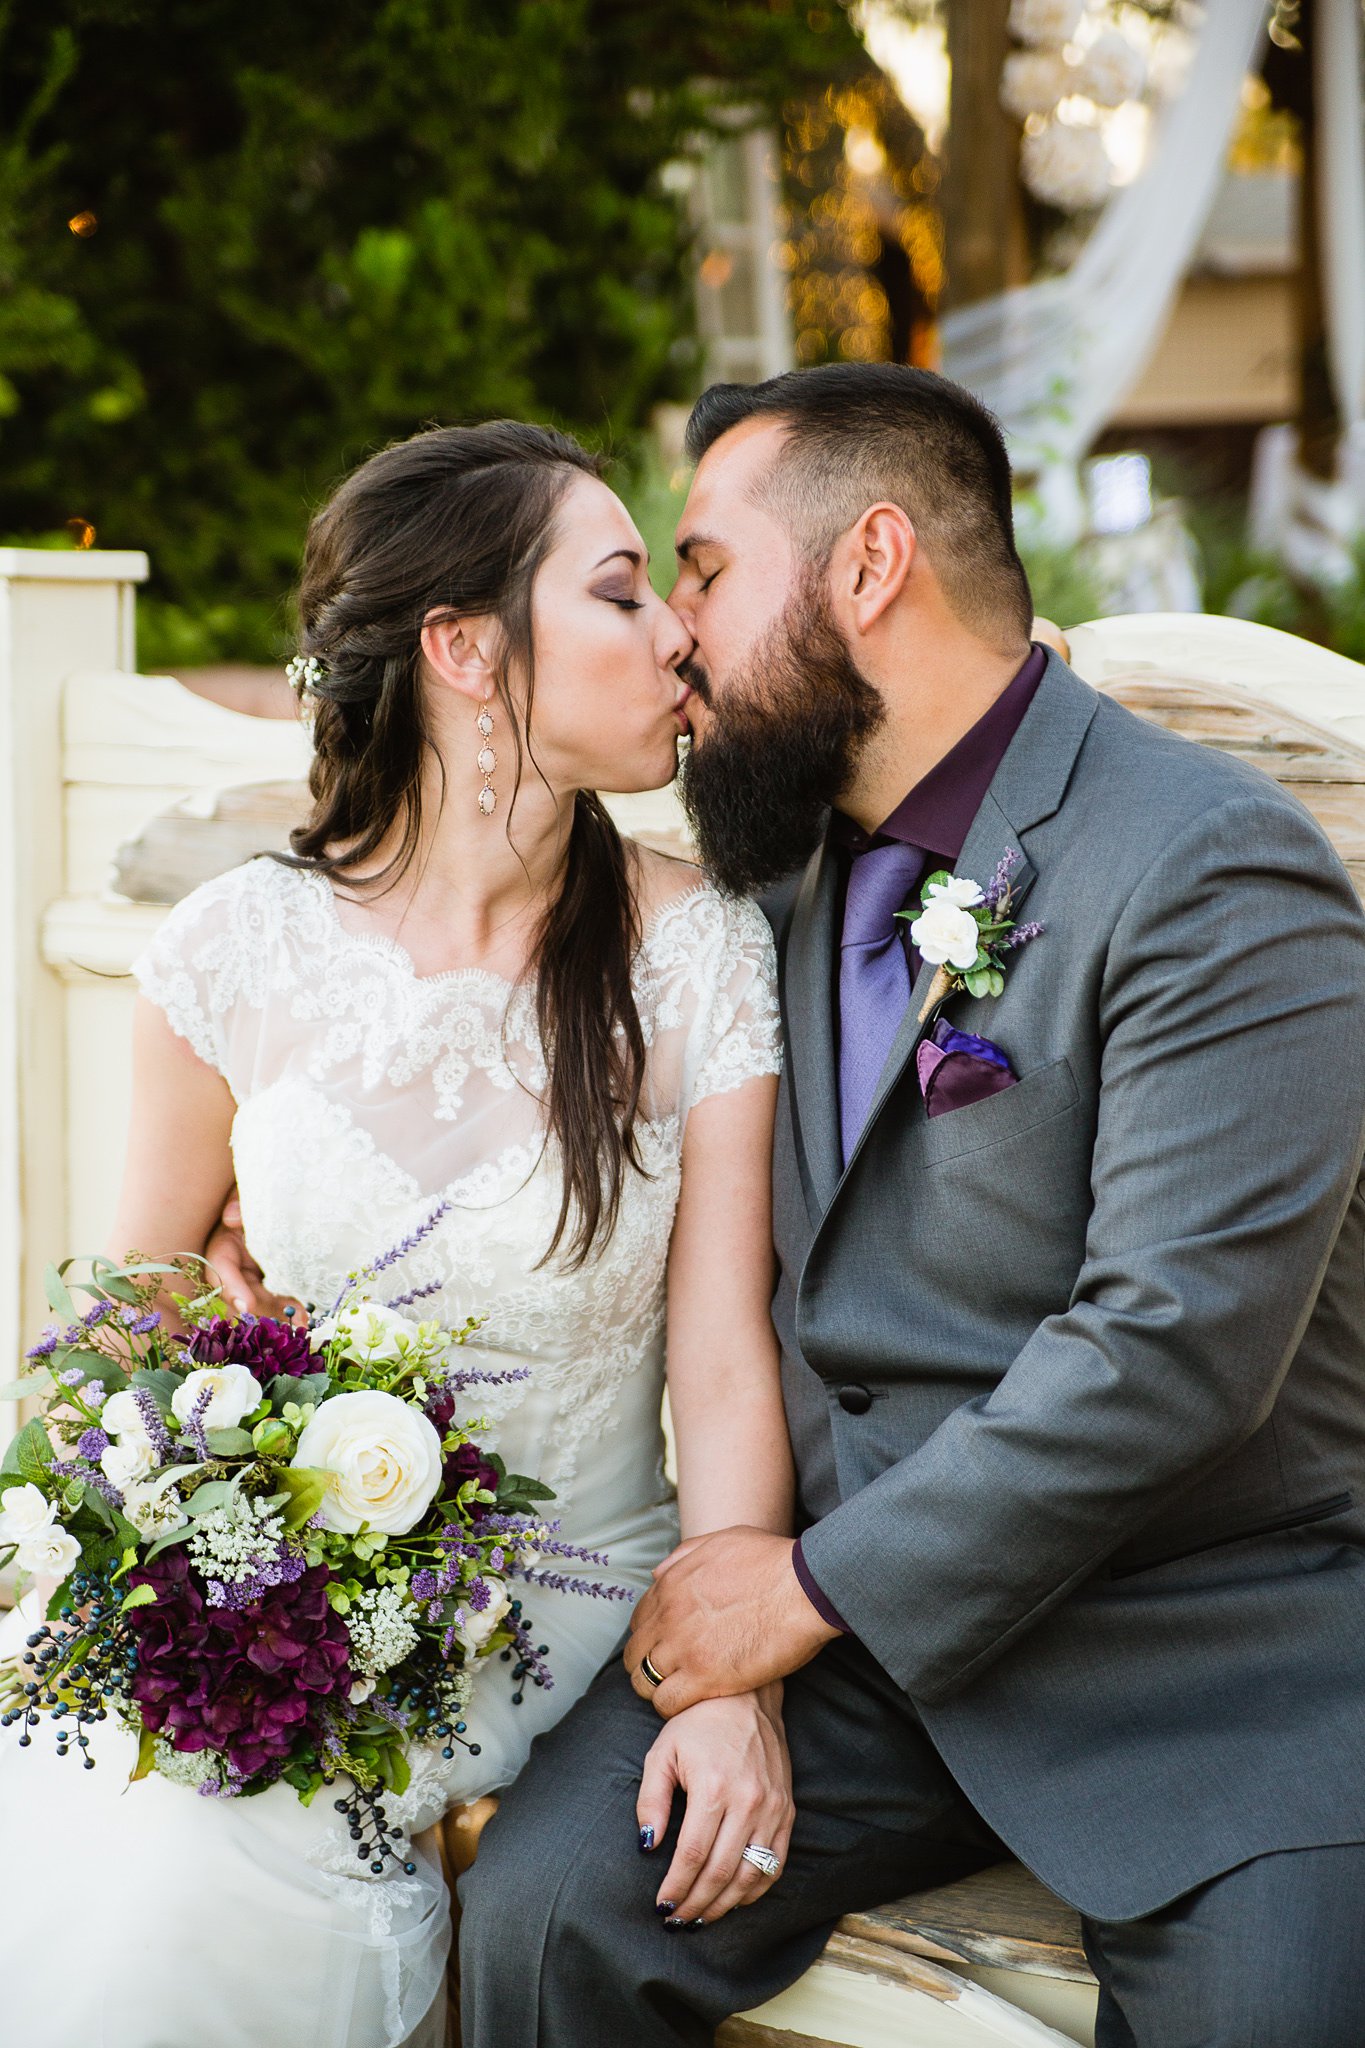  Bride and groom share a kiss on a rustic bench at the Schnepf Farms Farmhouse by Arizona wedding photographer PMA Photography.